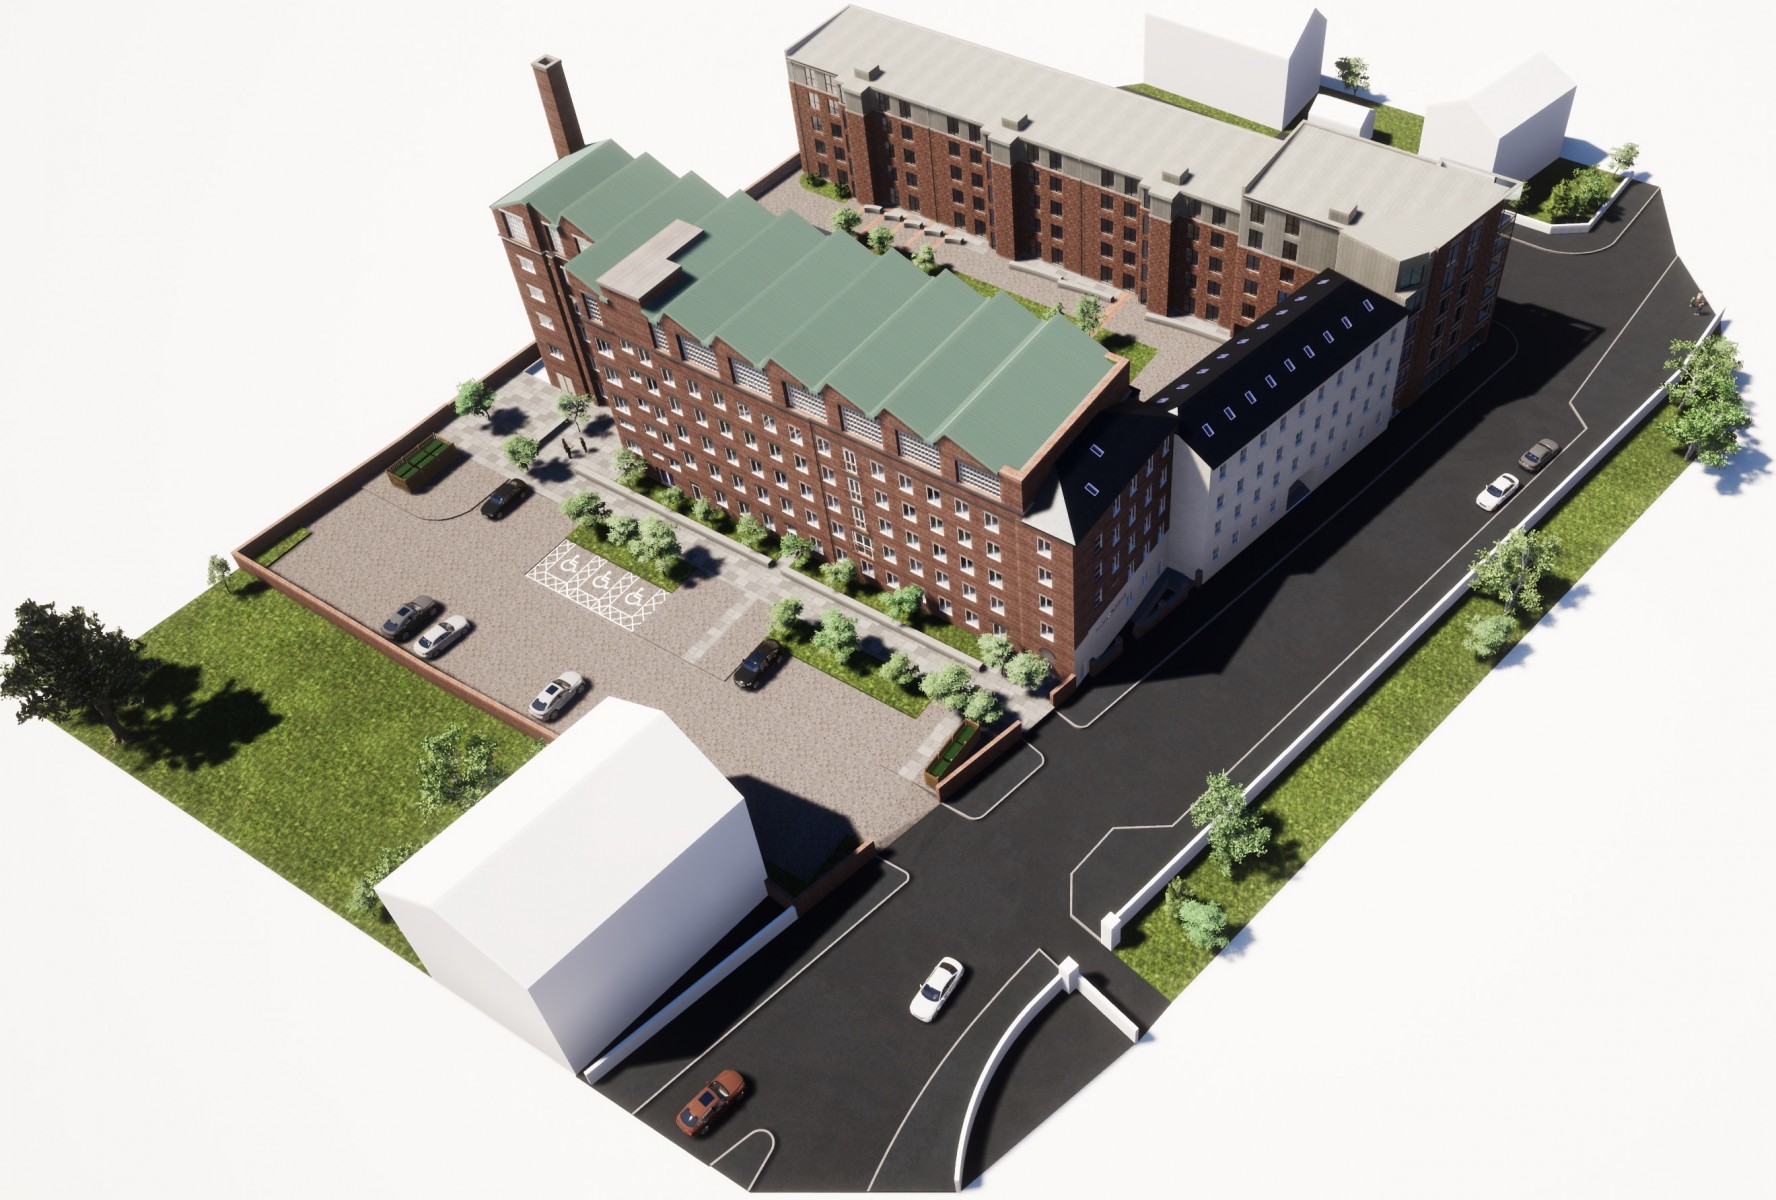 Final plans submitted for 100 apartments at historic Glasgow mill site